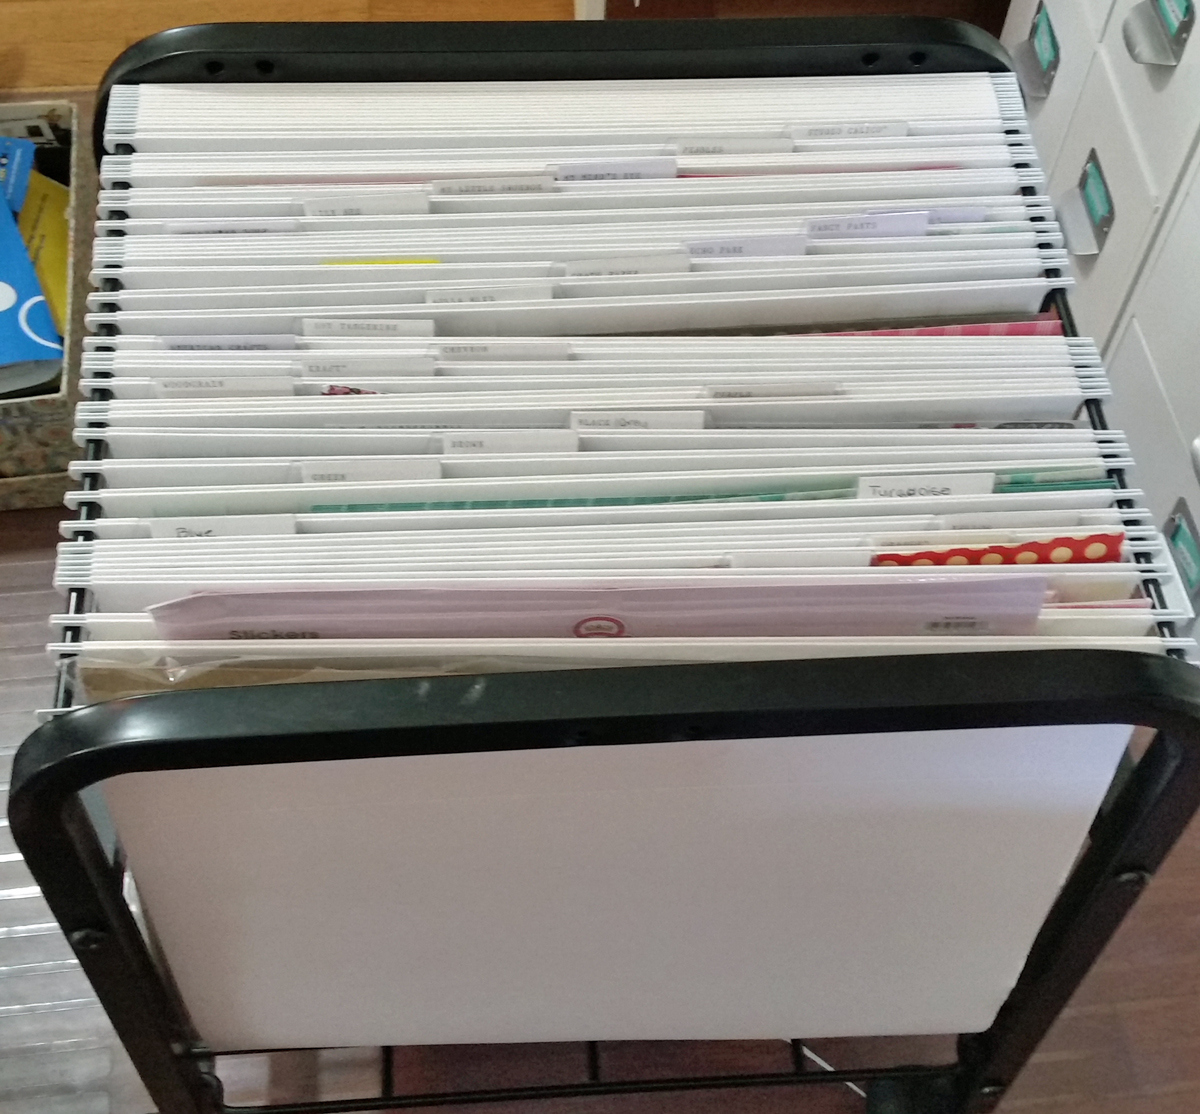 Copic Marker Storage and Organization - Kat's Adventures in Paper  Crafting